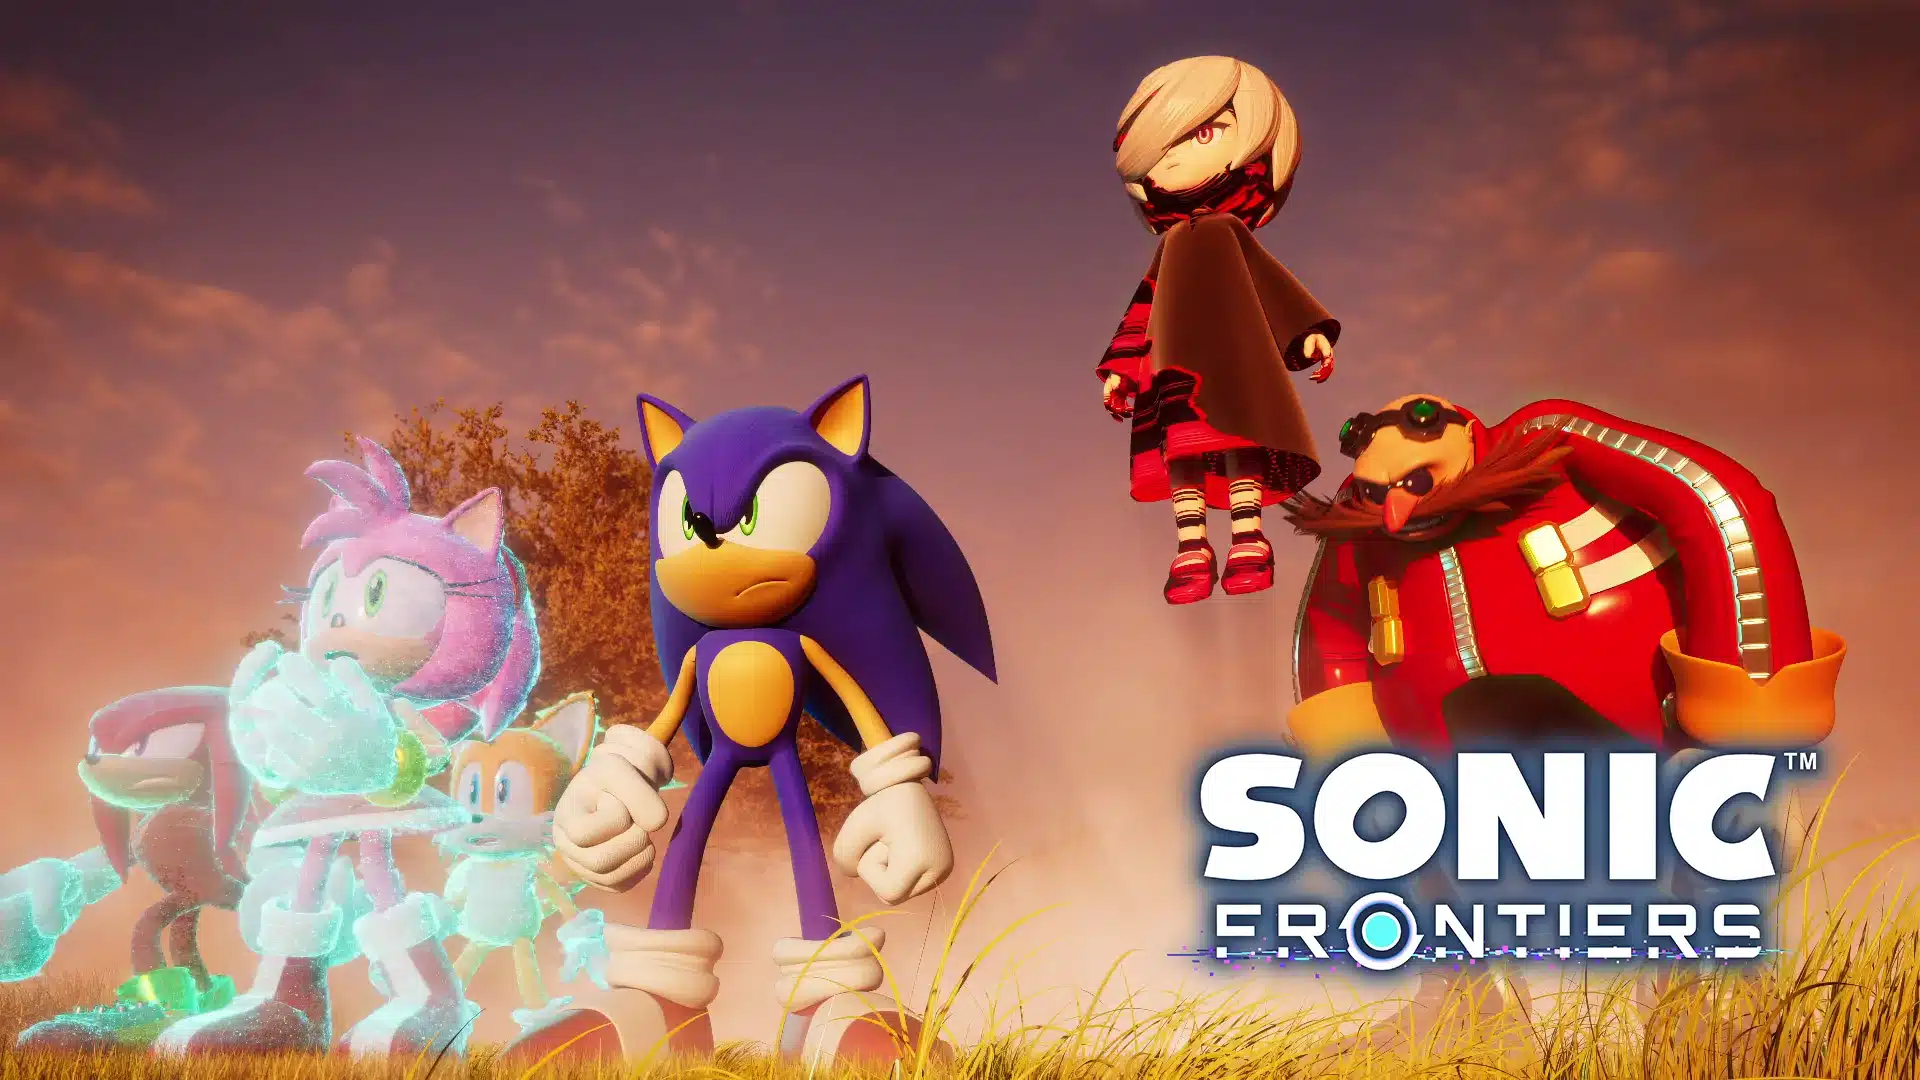 Really hyped for Sonic Frontiers Update 3 - The Sonic News Leader